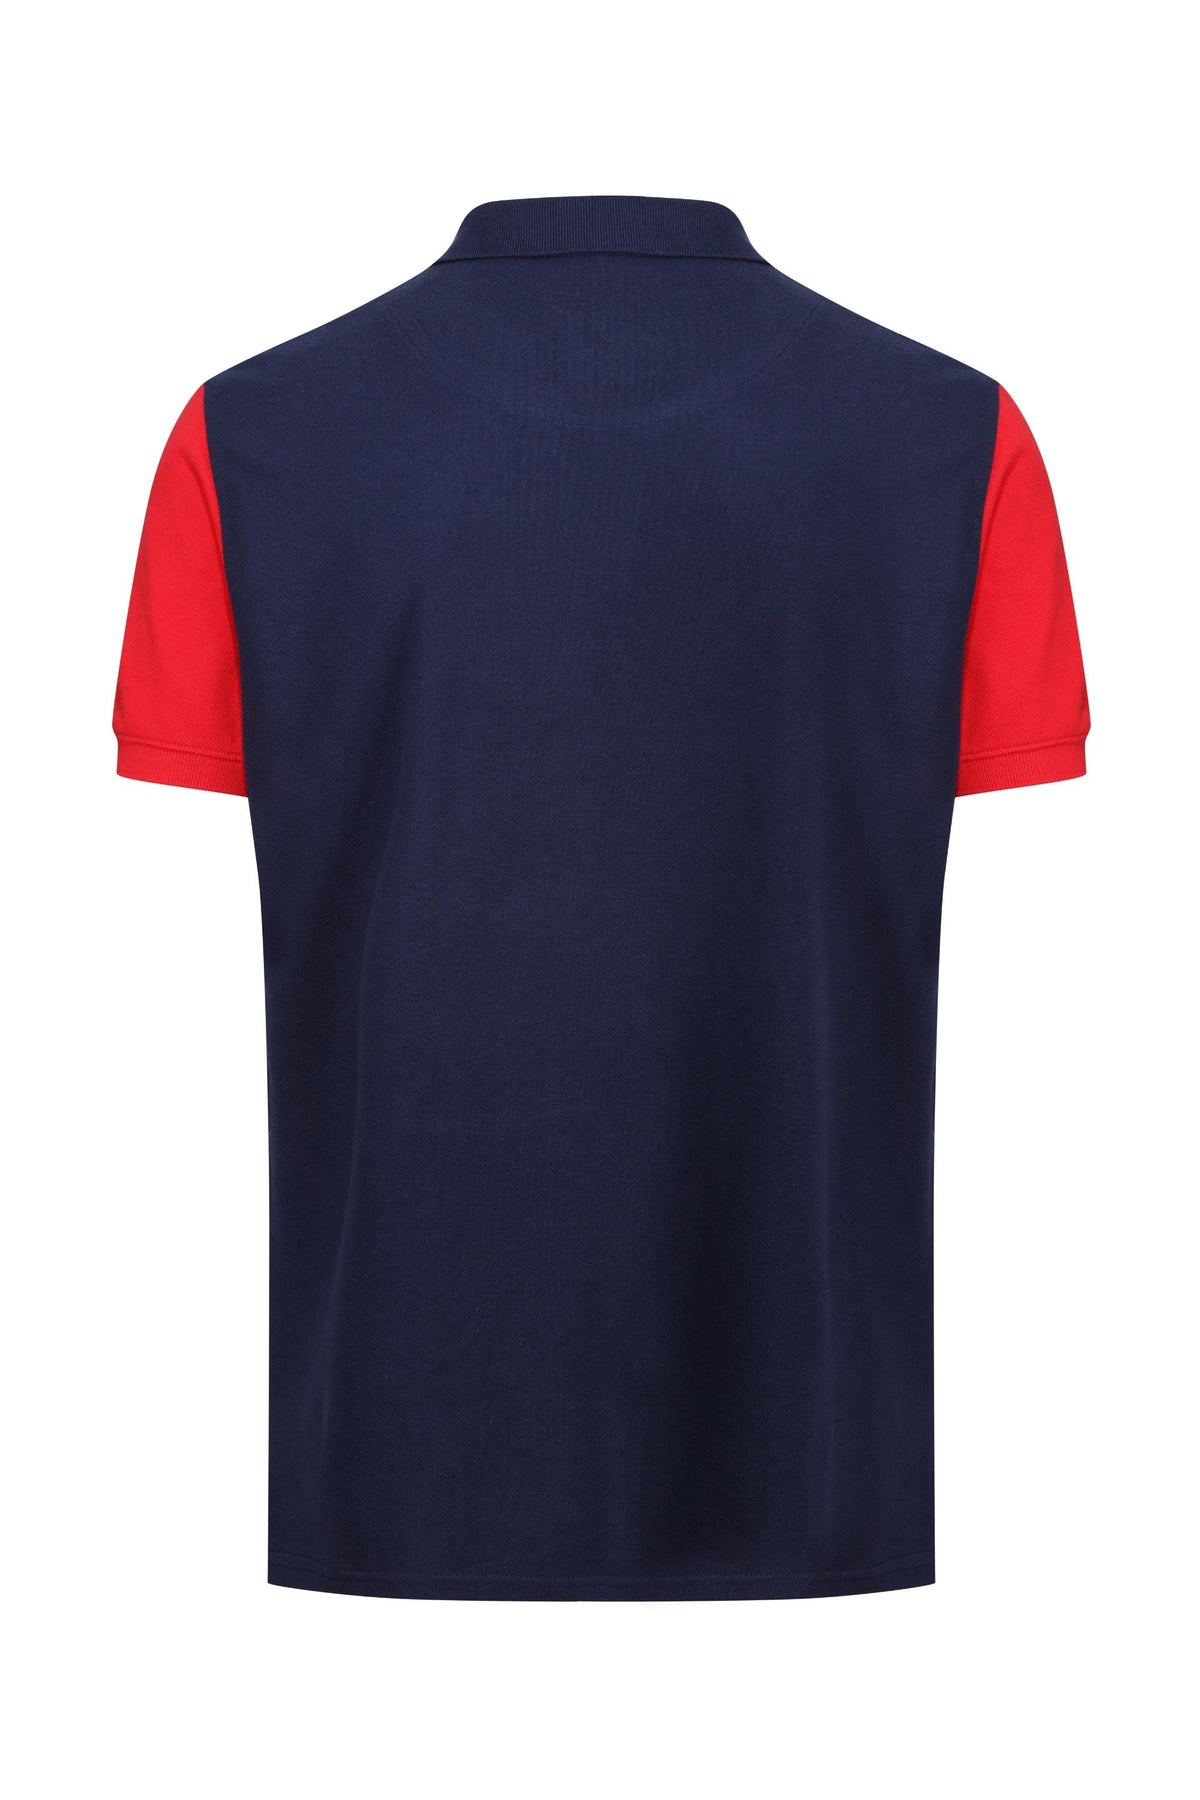 Holt Polo Shirt - Navy - Whale Of A Time Clothing